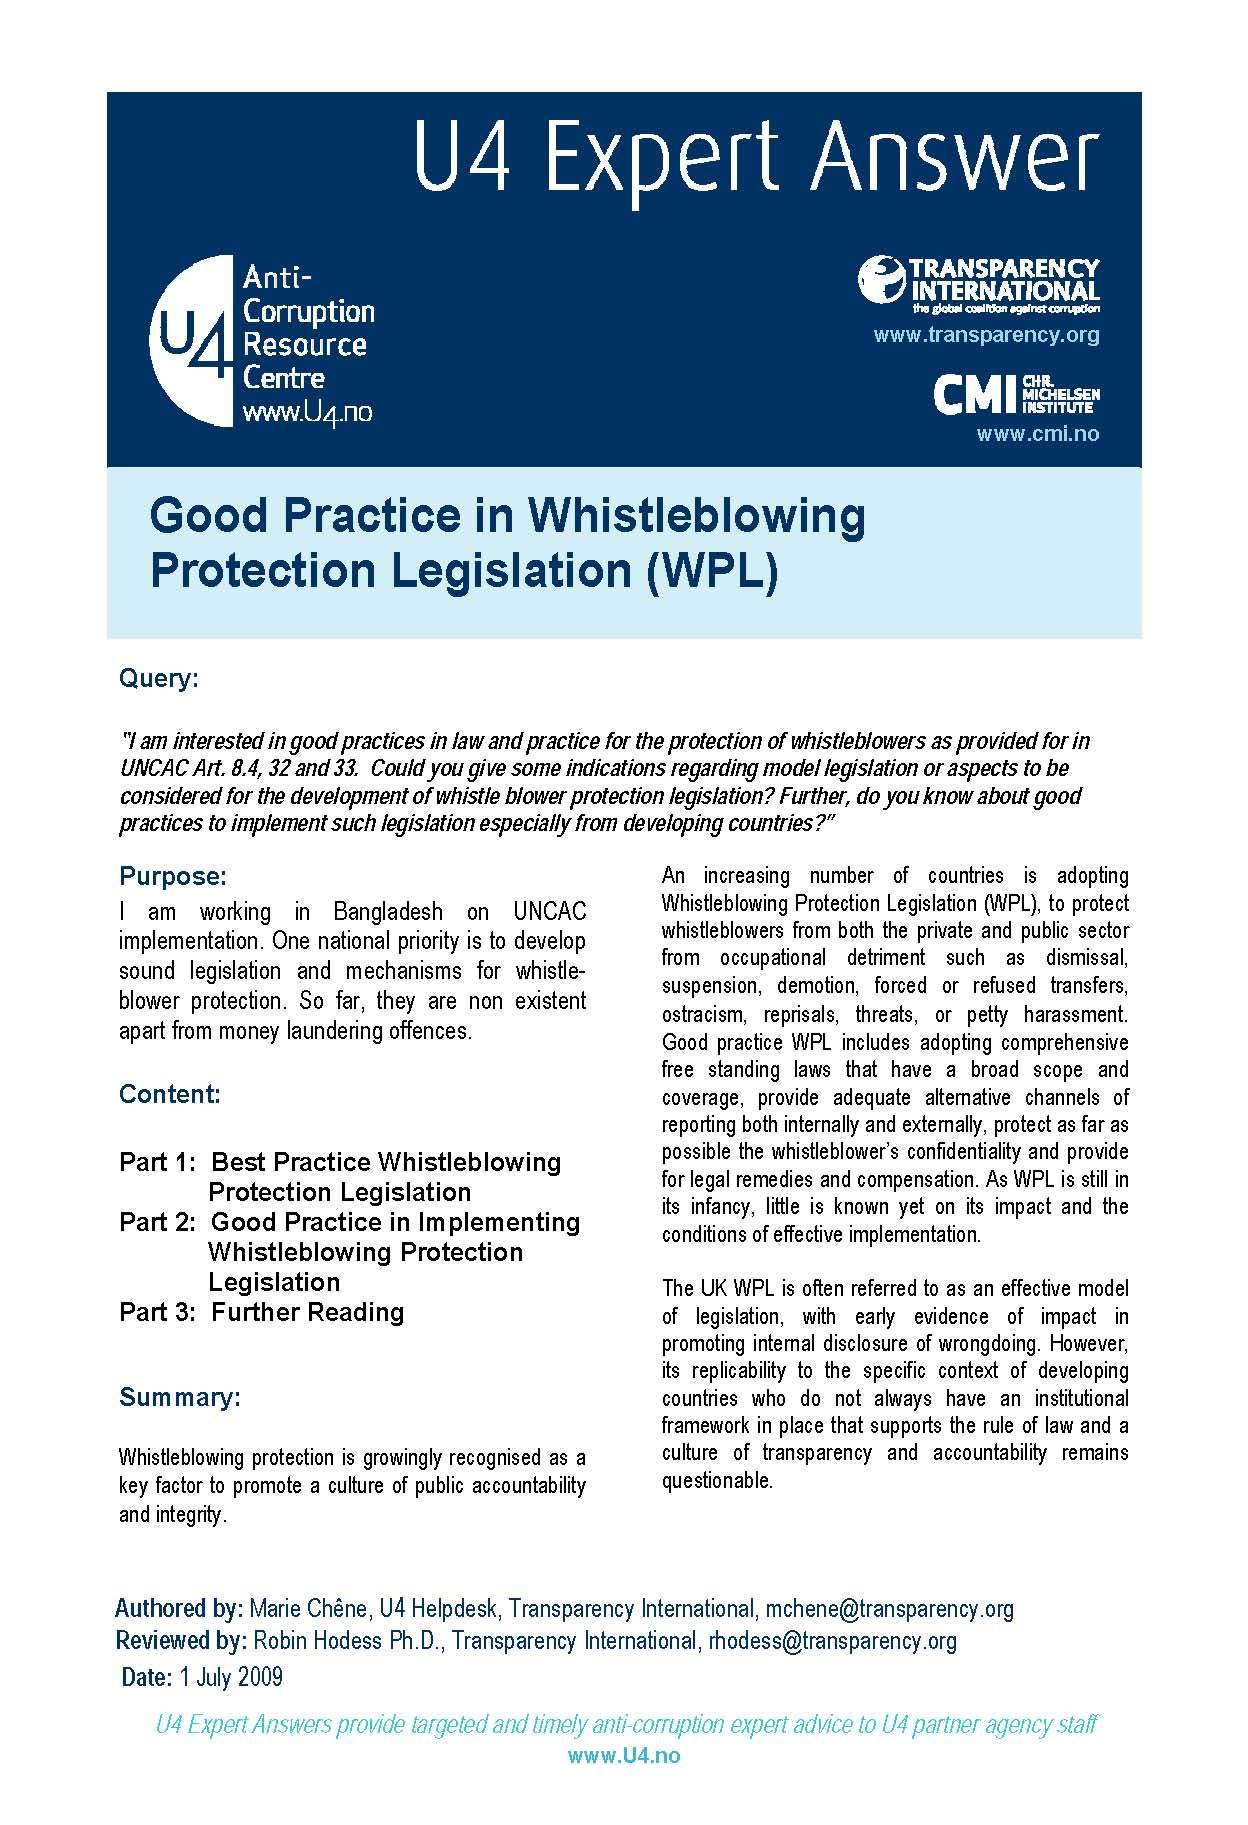 Good Practice in Whistle blowing Protection Legislation (WPL)